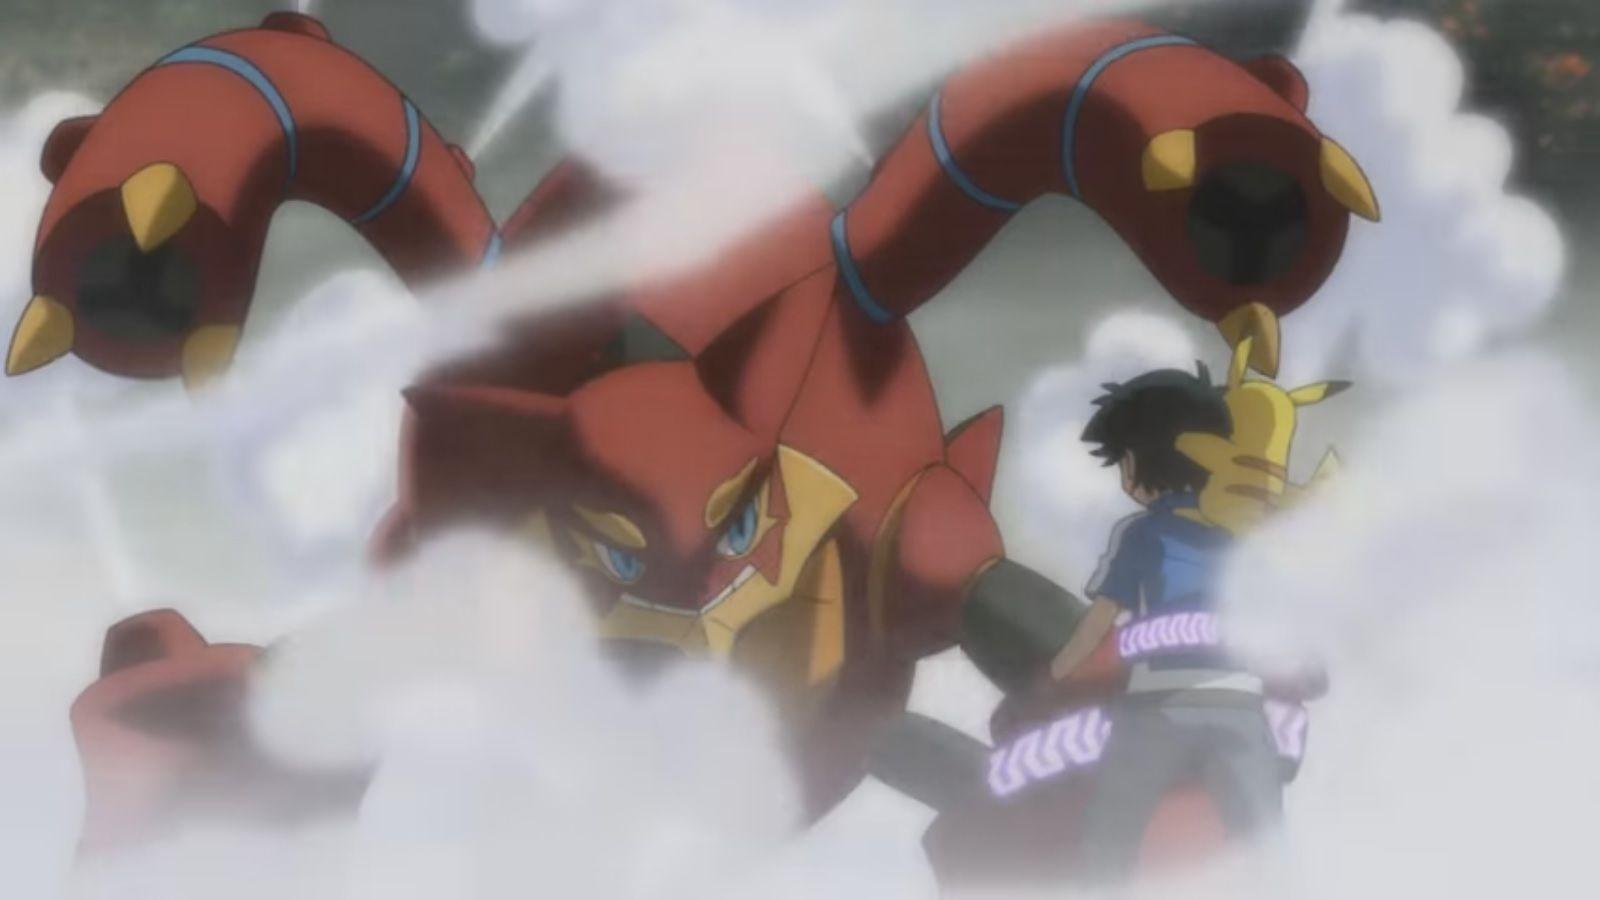 Pokemon the Movie: Volcanion and the Mechanical Marvel releasing